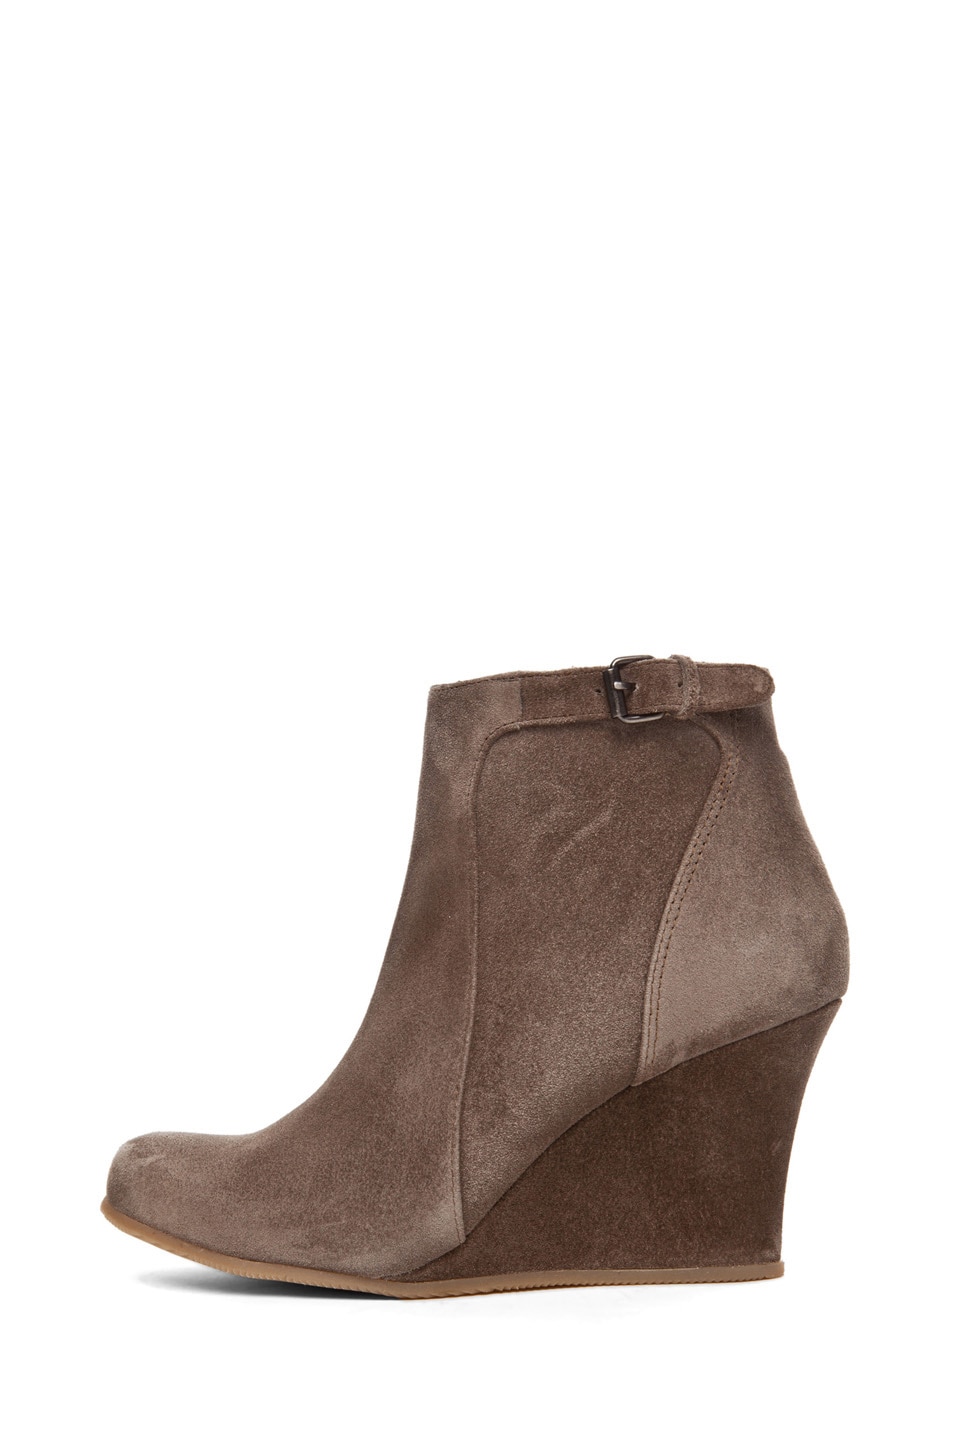 Lanvin Wedge Bootie in Taupe | FWRD